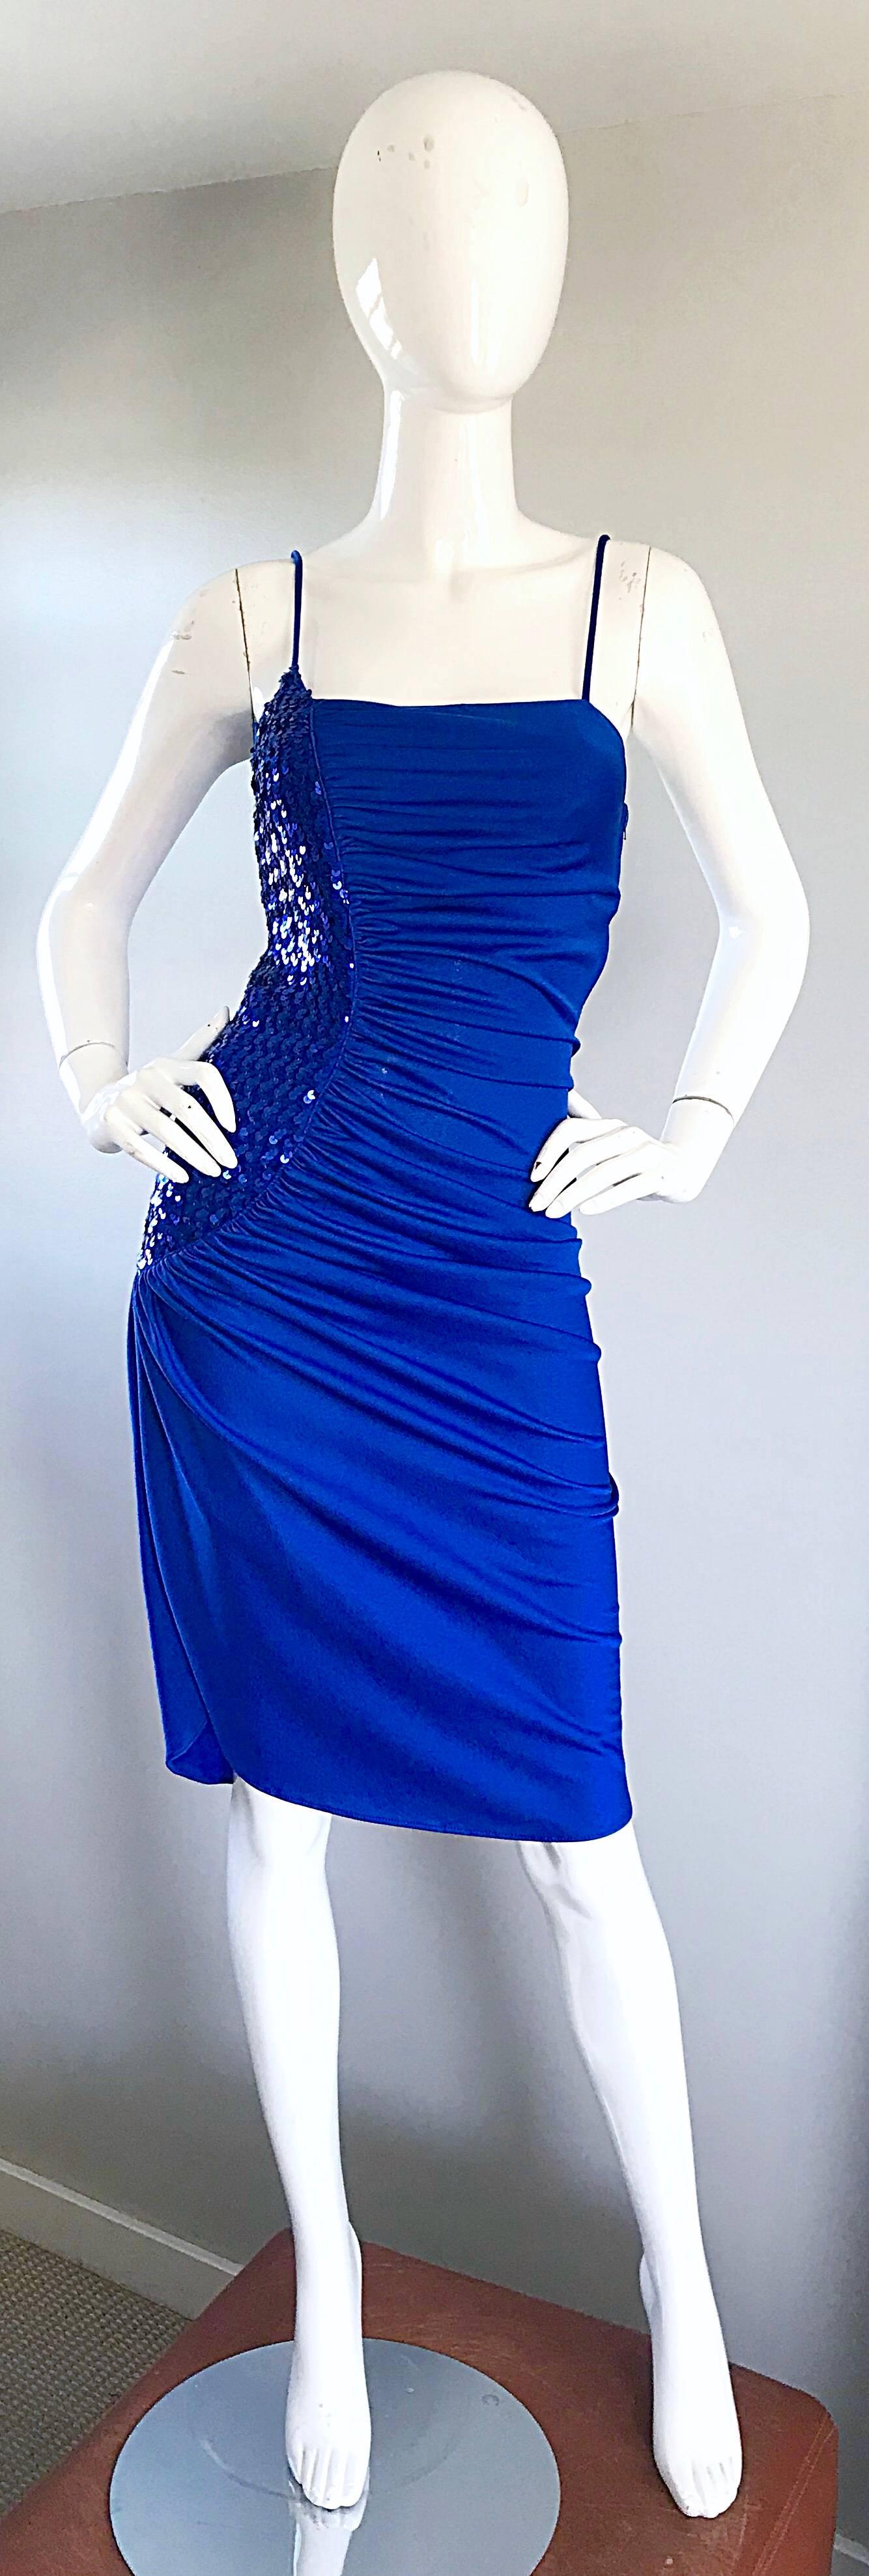 Sexy Blue Dress - 10 For Sale on 1stDibs